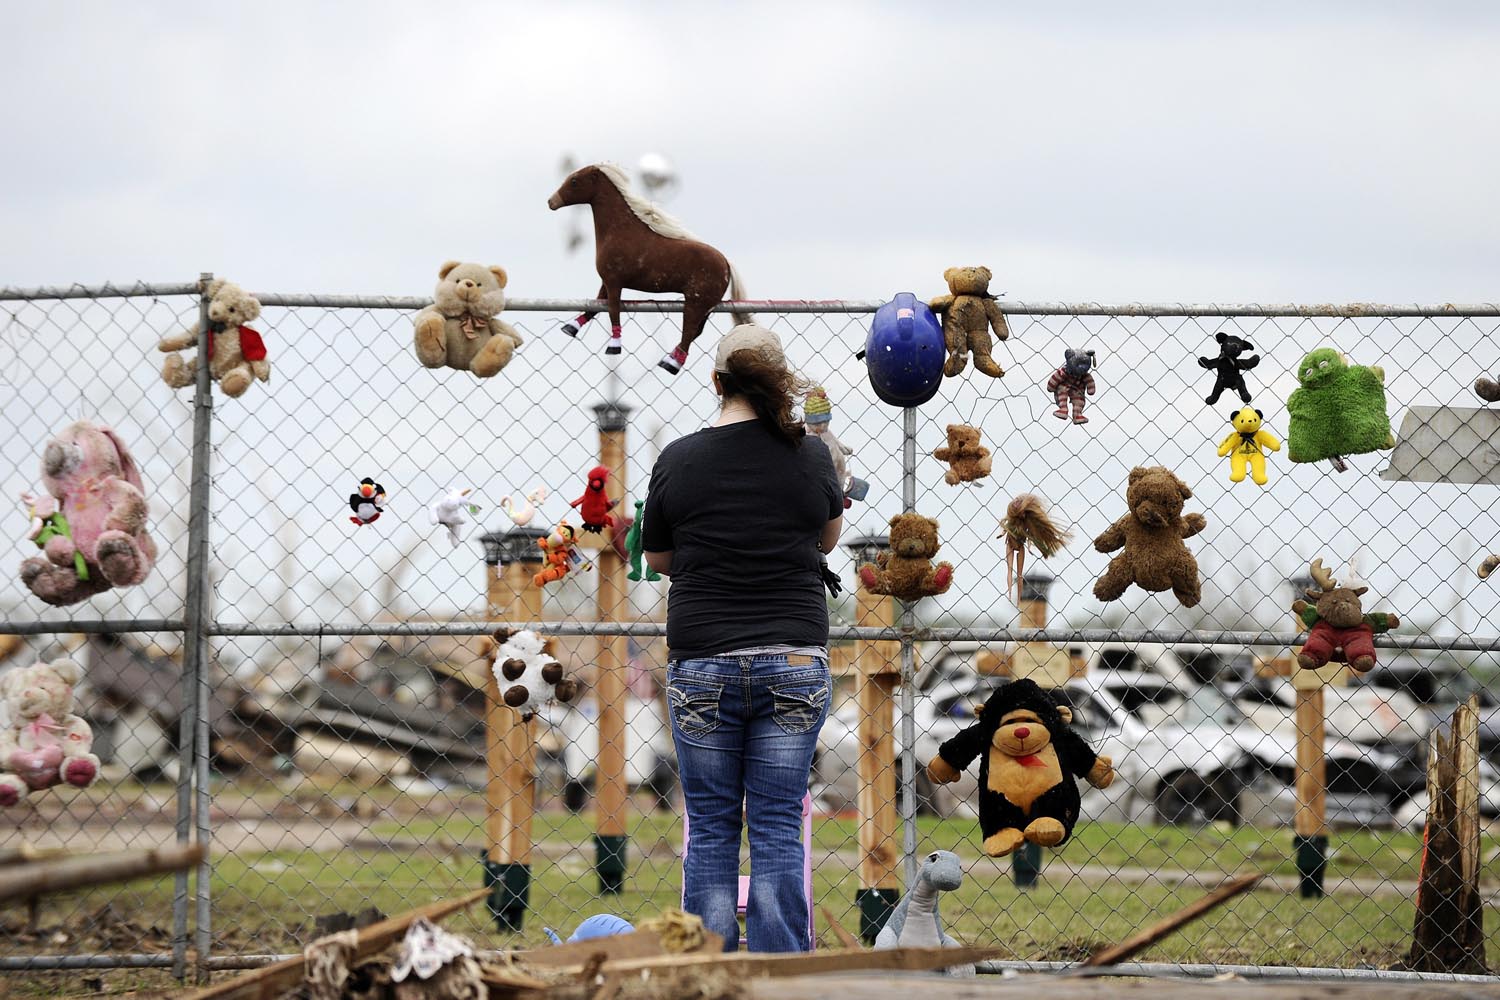 May 25, 2013. Stephanie Salinas visits a makeshift memorial with toys and crosses at the Plaza Towers elementary school in memory of the seven children who died during the devastating tornado, in Moore, Okla.